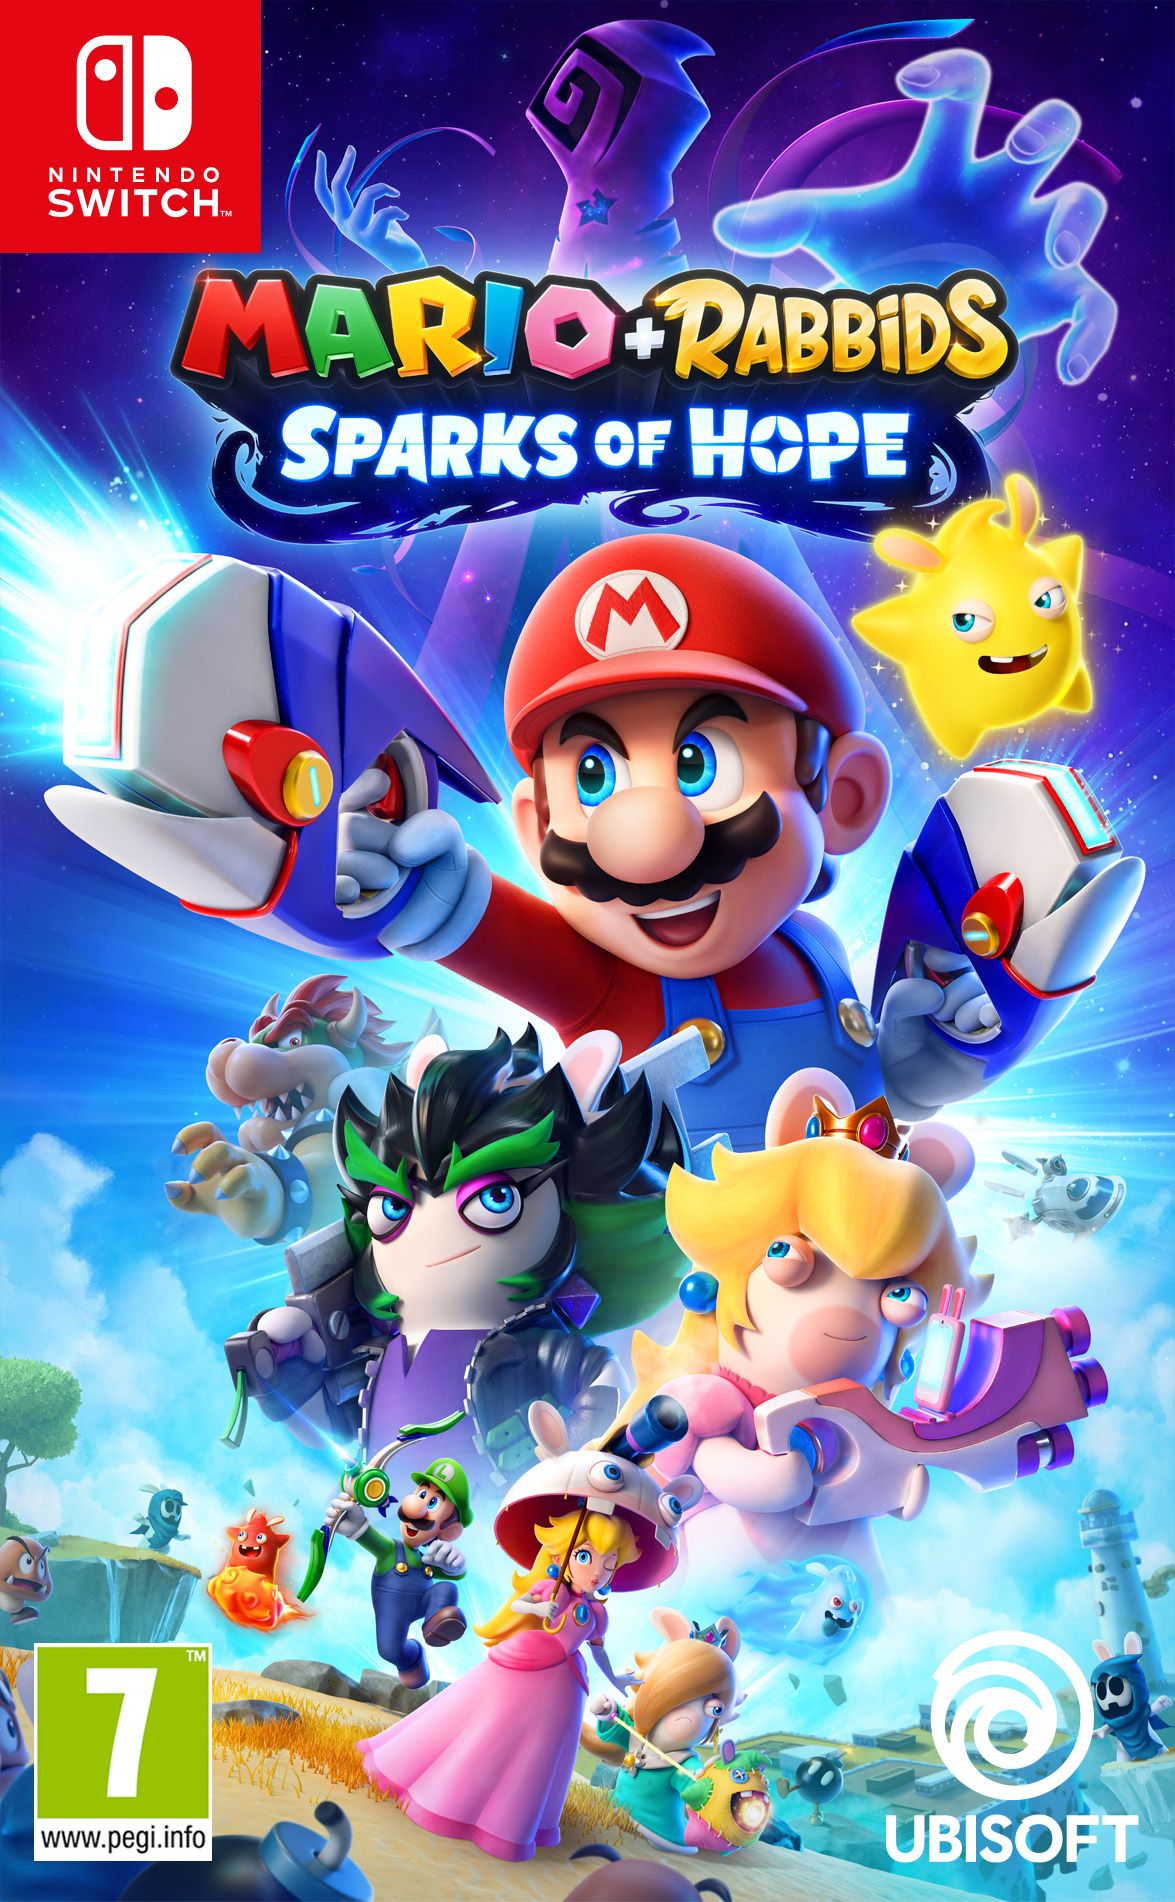 Mario+Rabbids Sparks of Hope